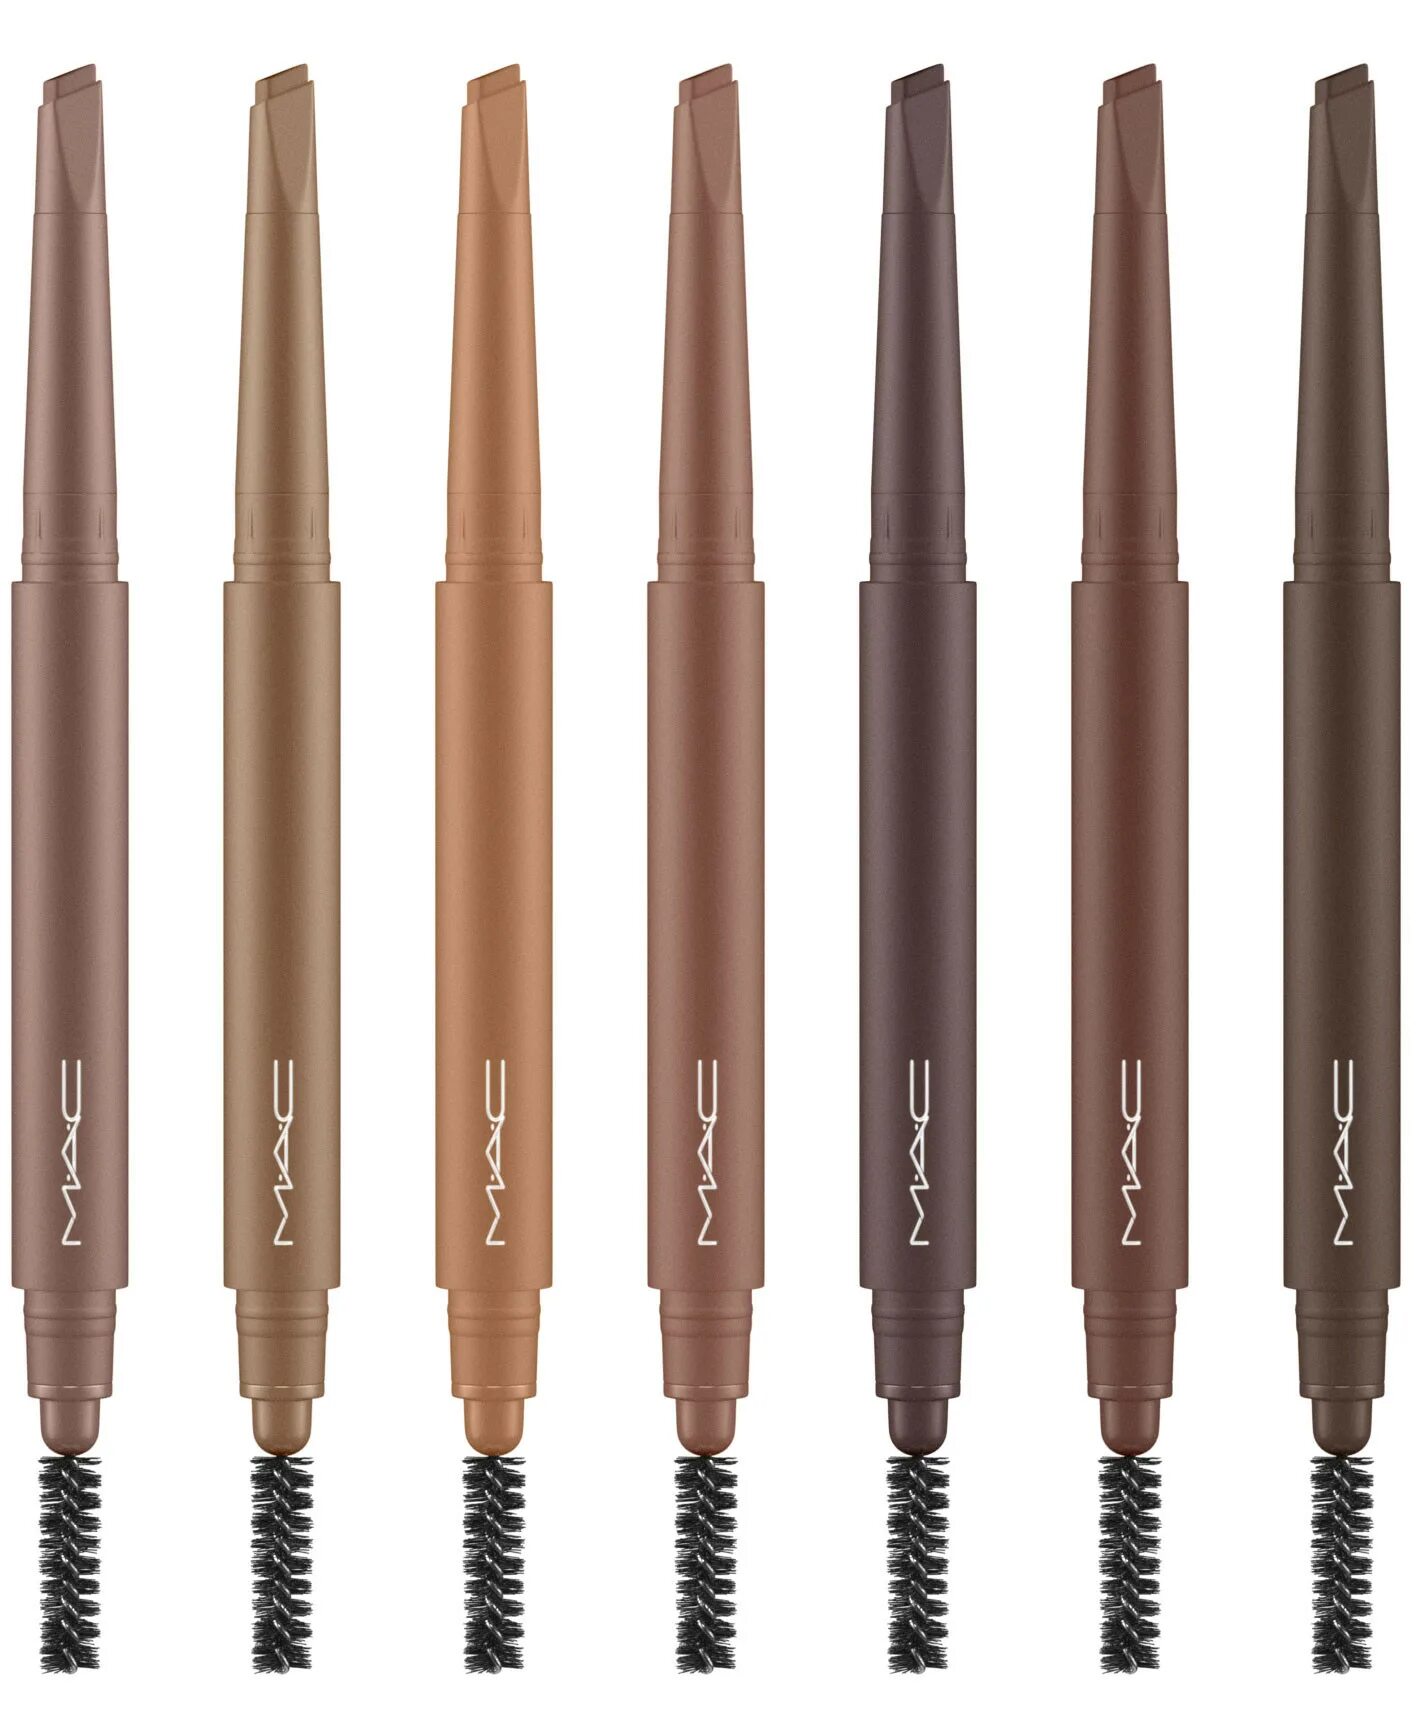 Taupe Veluxe Brow Liner карандаш Mac. Карандаш Mac Eyebrow Pencil. Mac карандаш для бровей Veluxe Brow Taupe. Mac Veluxe Brow Liner палитра.